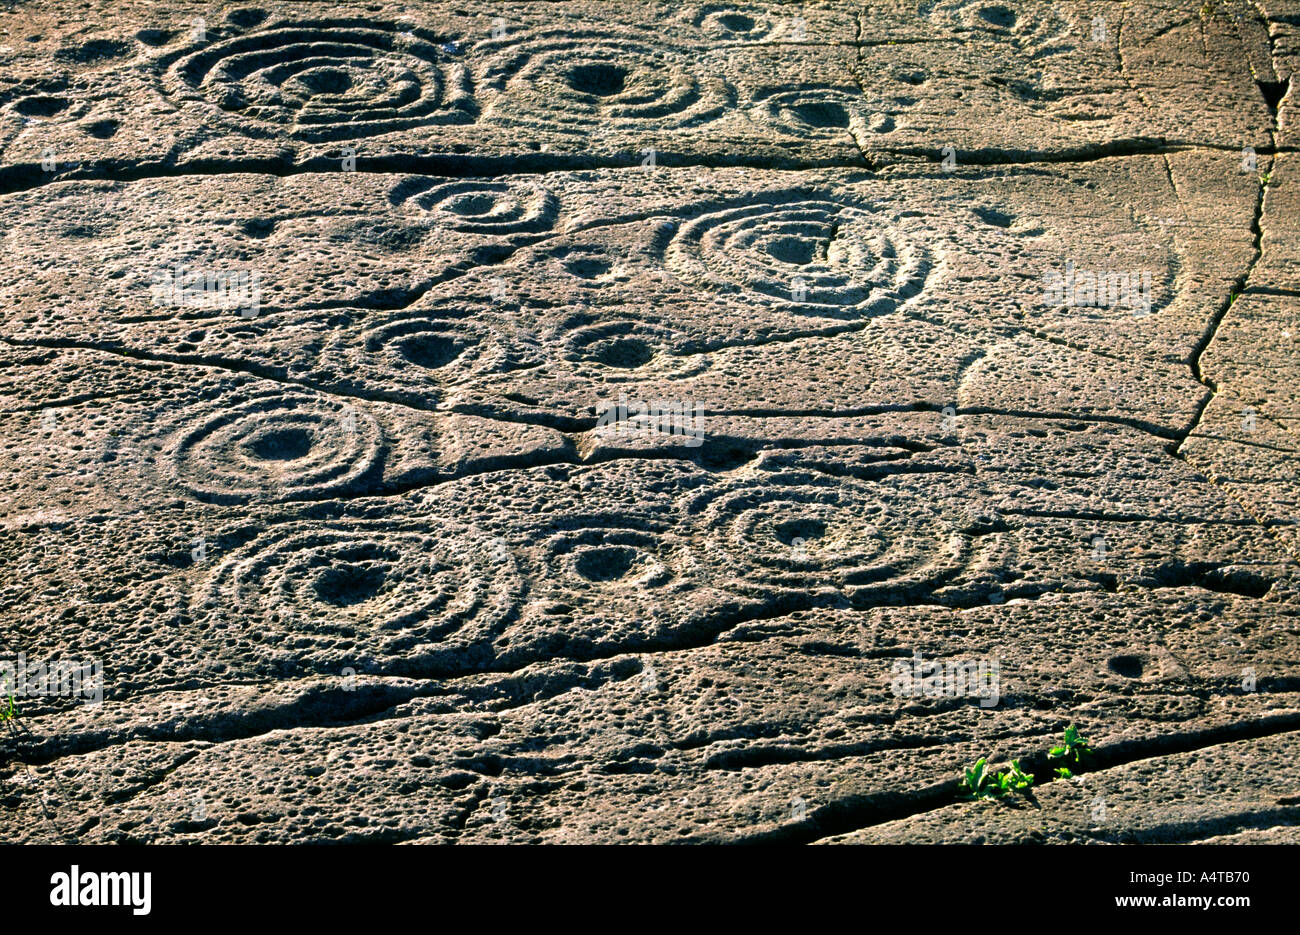 Prehistoric cup and ring mark marks carved stone rock art outcrop at Cairnbaan, Kilmartin Valley, Argyll, west Scotland, UK Stock Photo